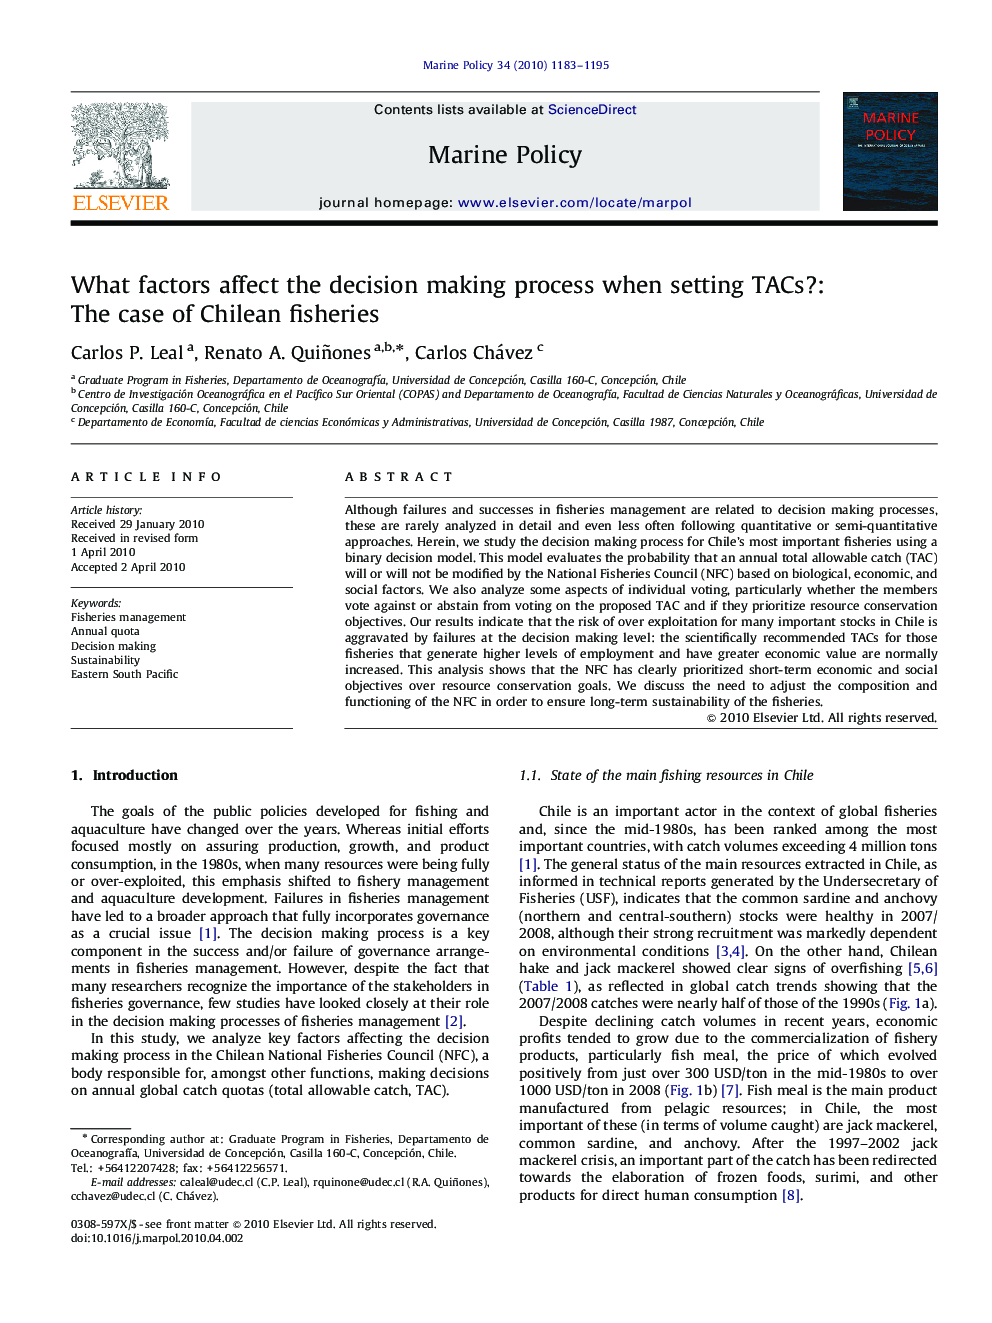 What factors affect the decision making process when setting TACs?: The case of Chilean fisheries